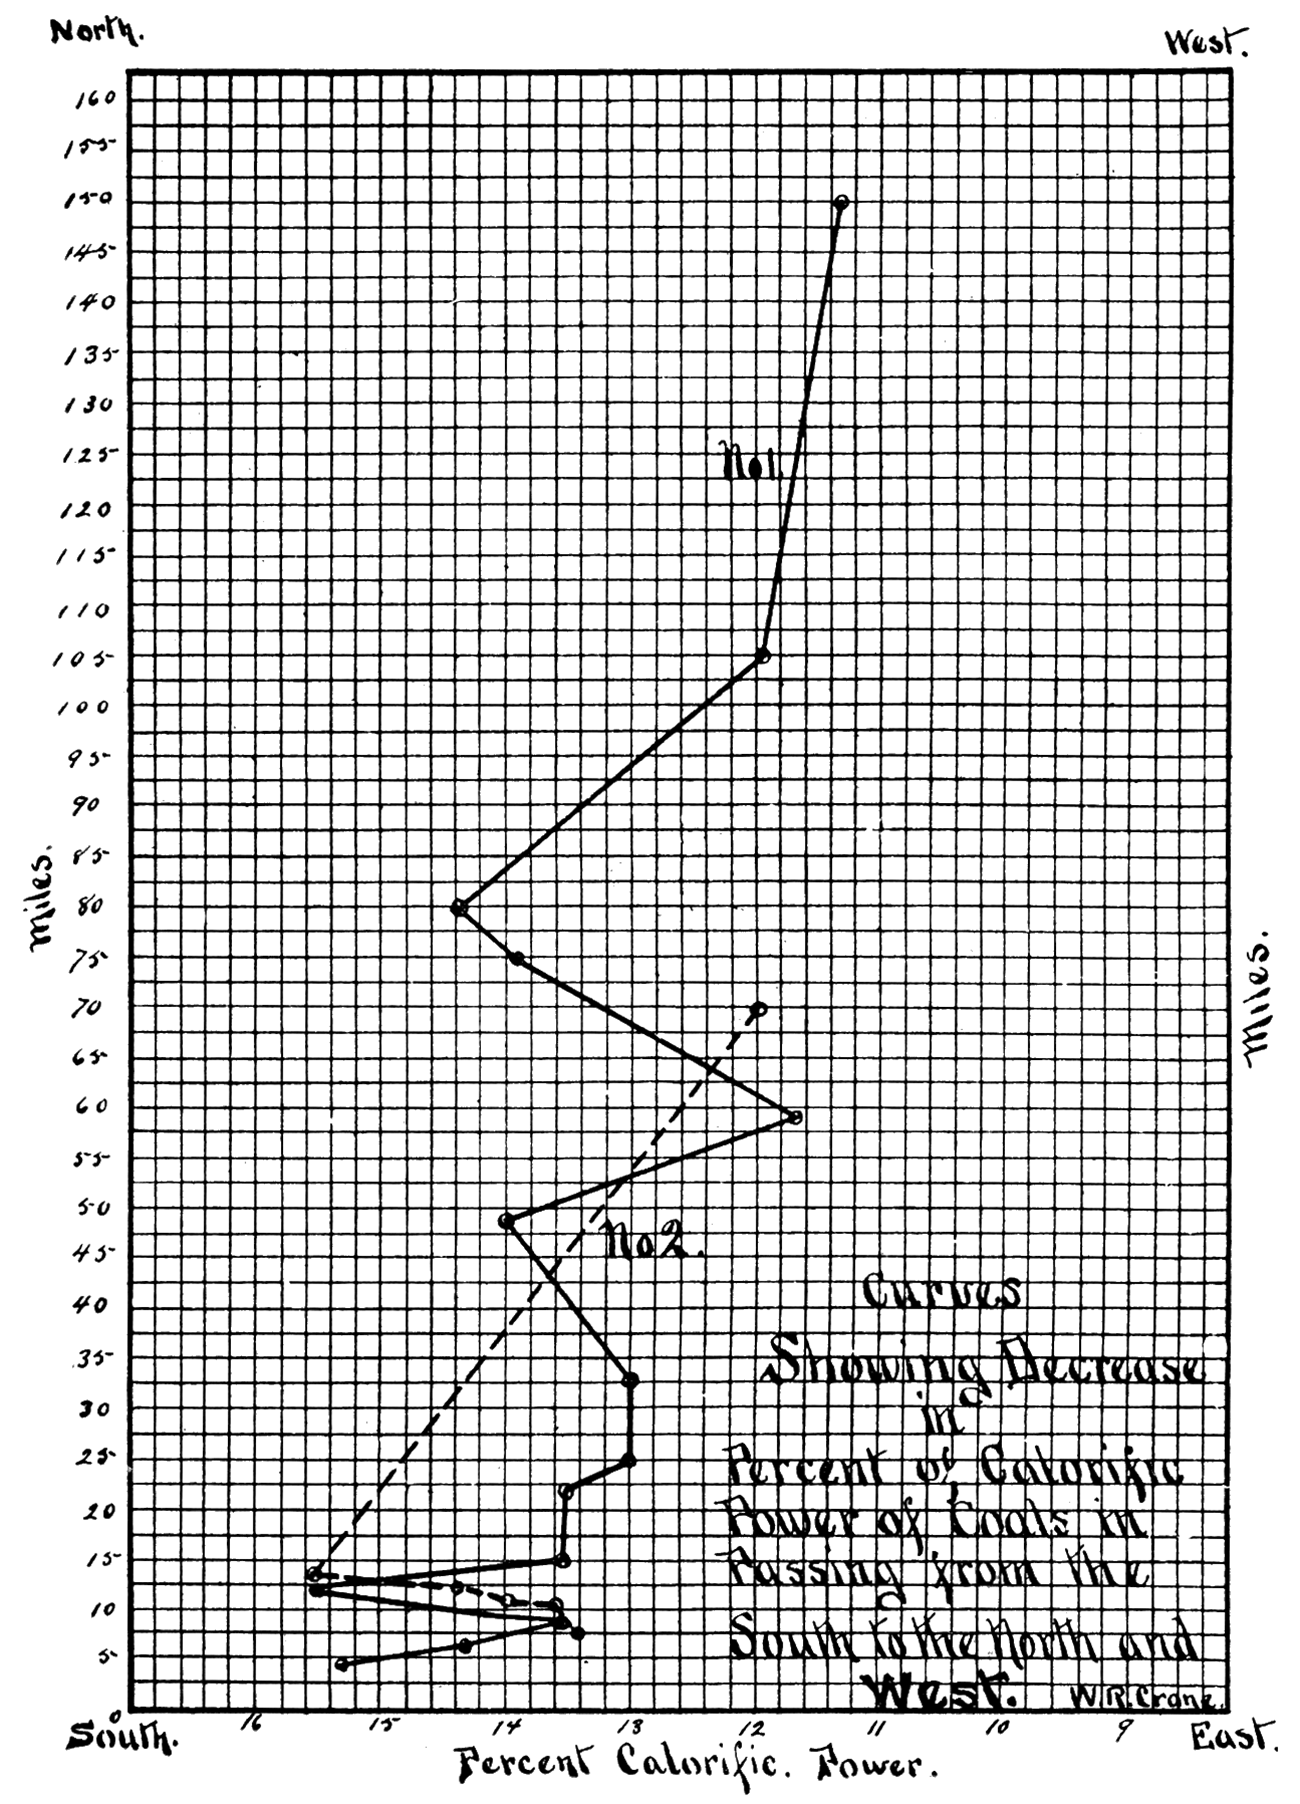 Diagrams showing decrease in percent of calorific power of coals of the state.